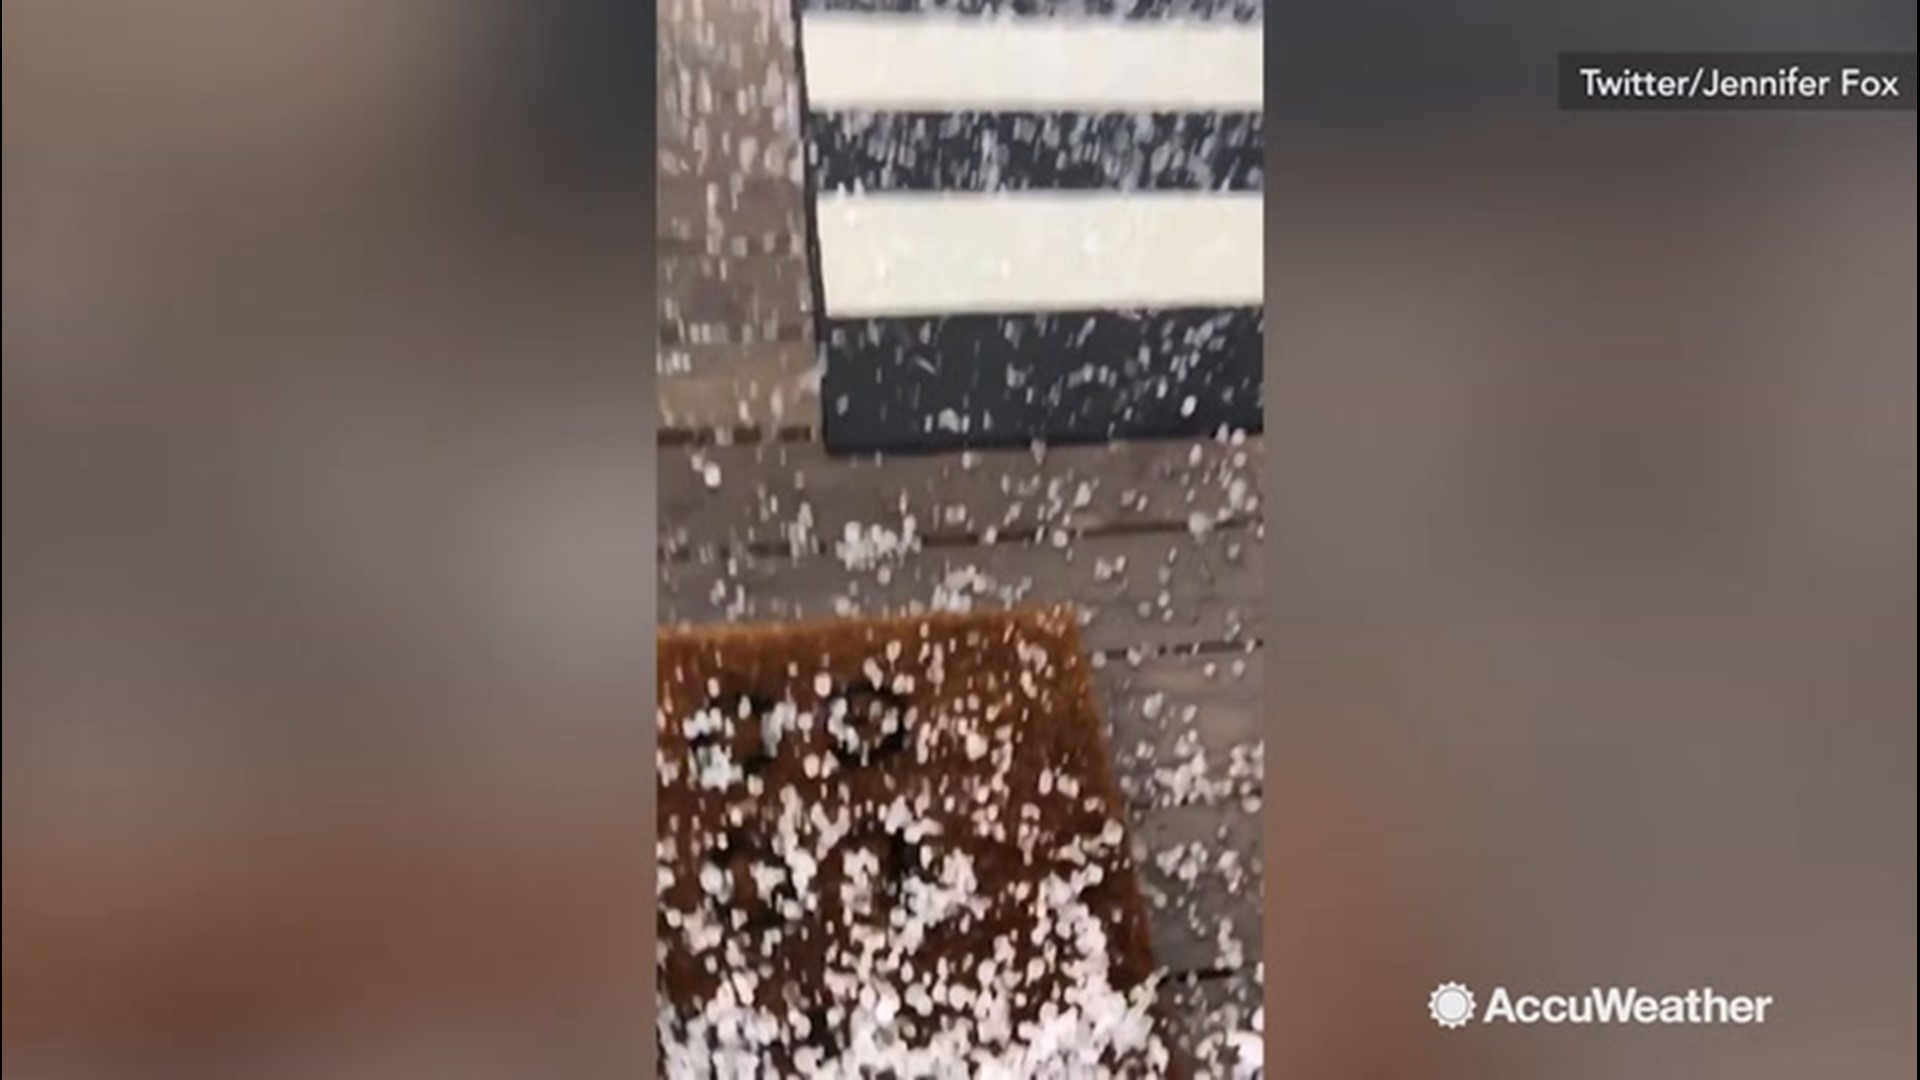 A thunderstorm struck Boone, North Carolina, on Aug. 19. Not only was there lighting and wind, but also some pretty crazy hail.